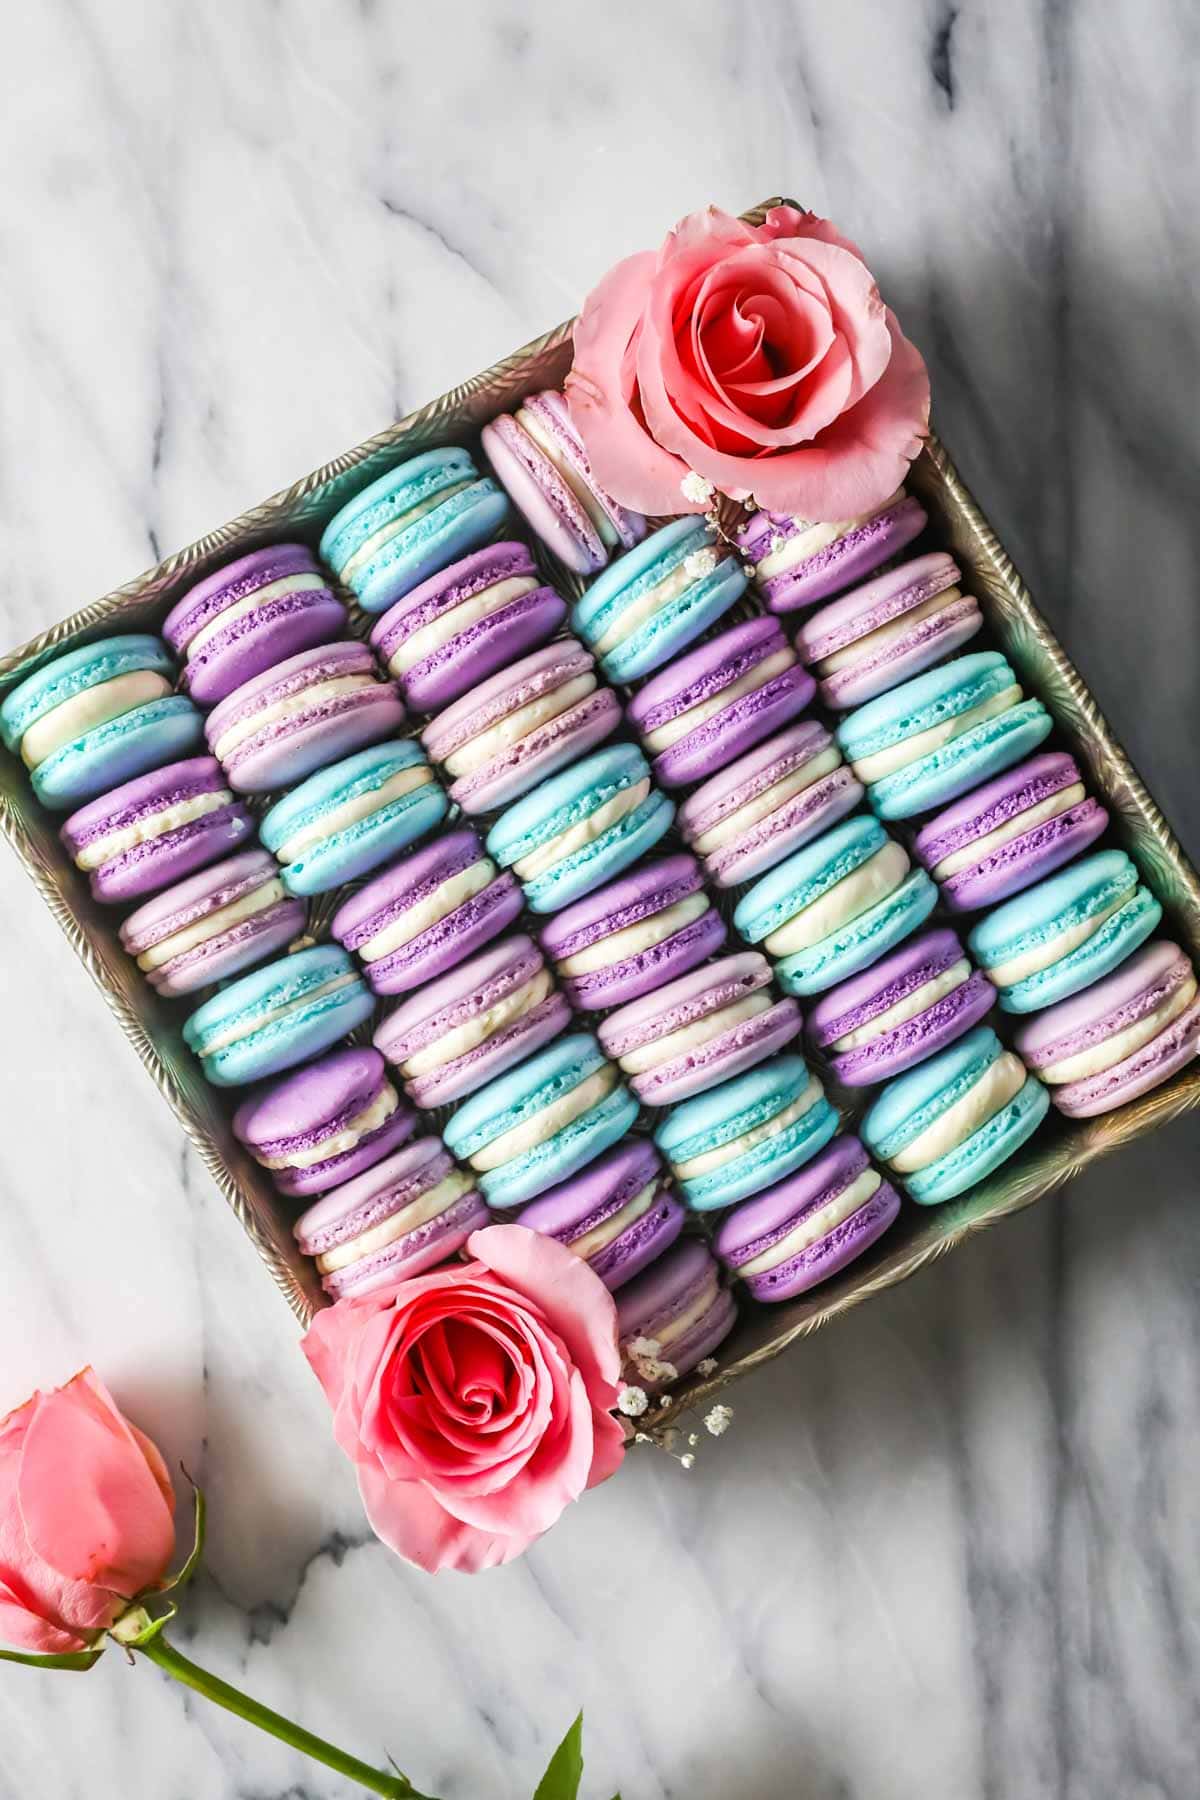 Blue, light purple, and dark purple macarons arranged in a square pan accented with large pink roses